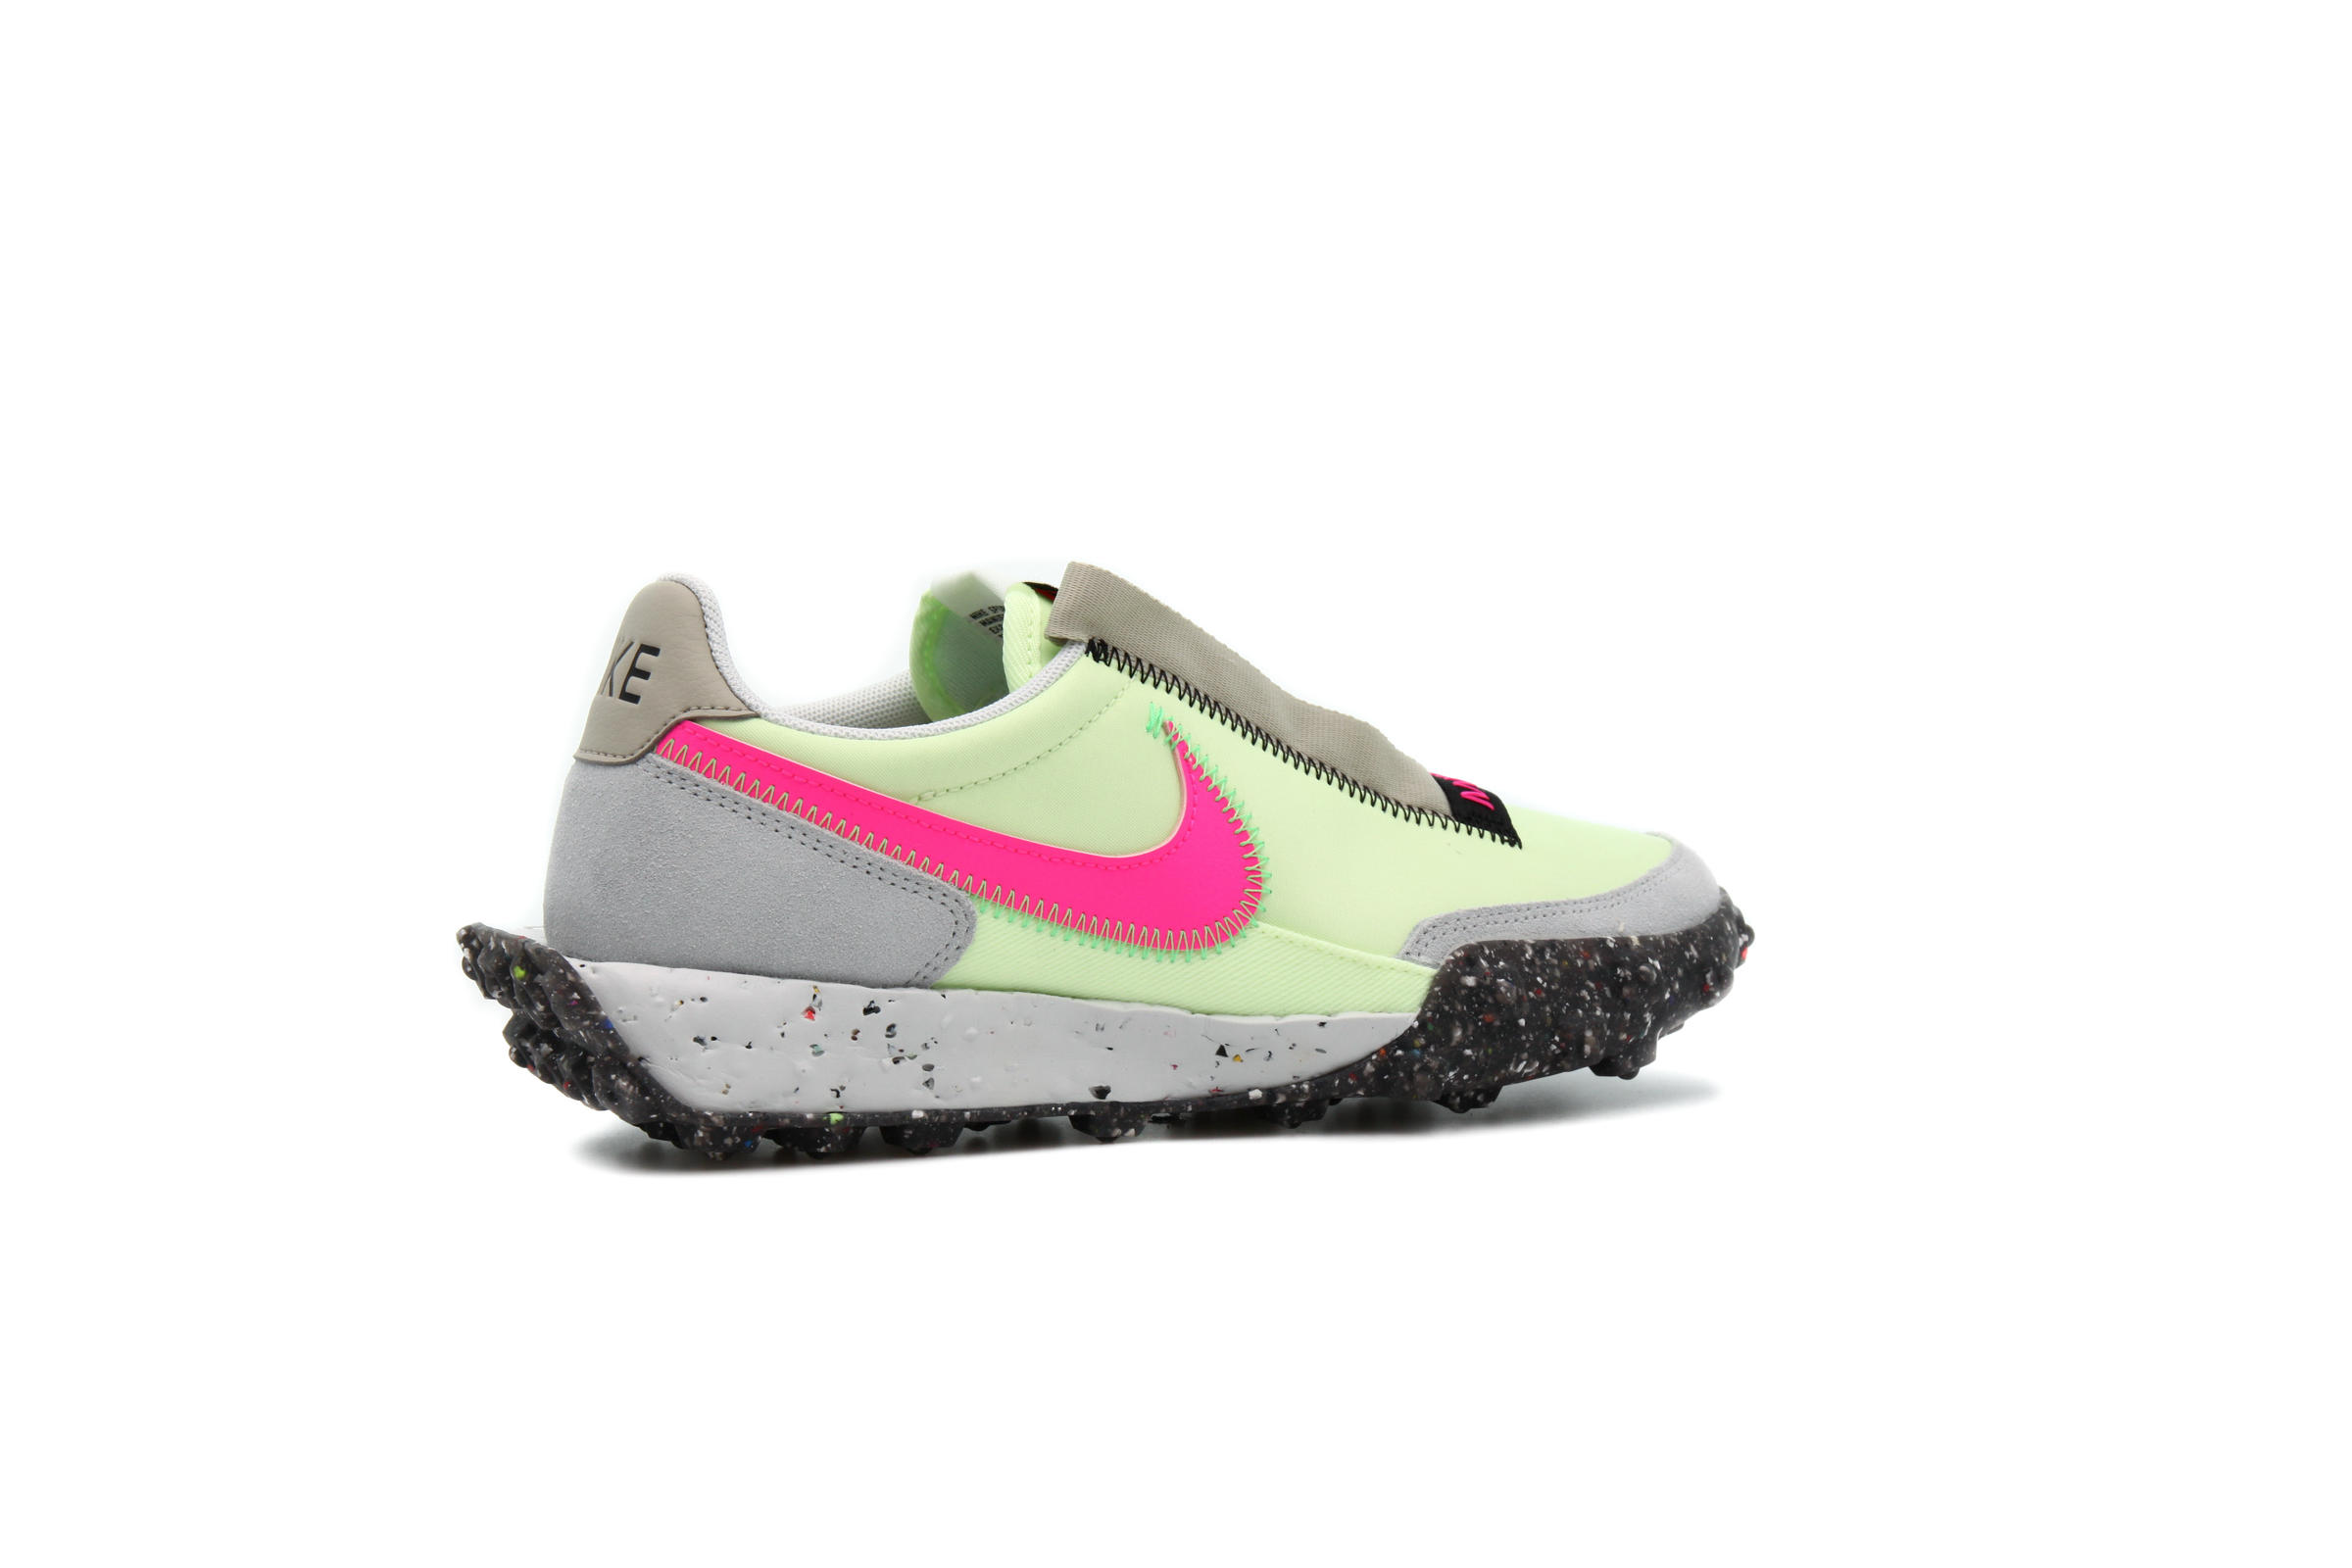 Nike WMNS WAFFLE RACER CRATER "BARELY VOLT"